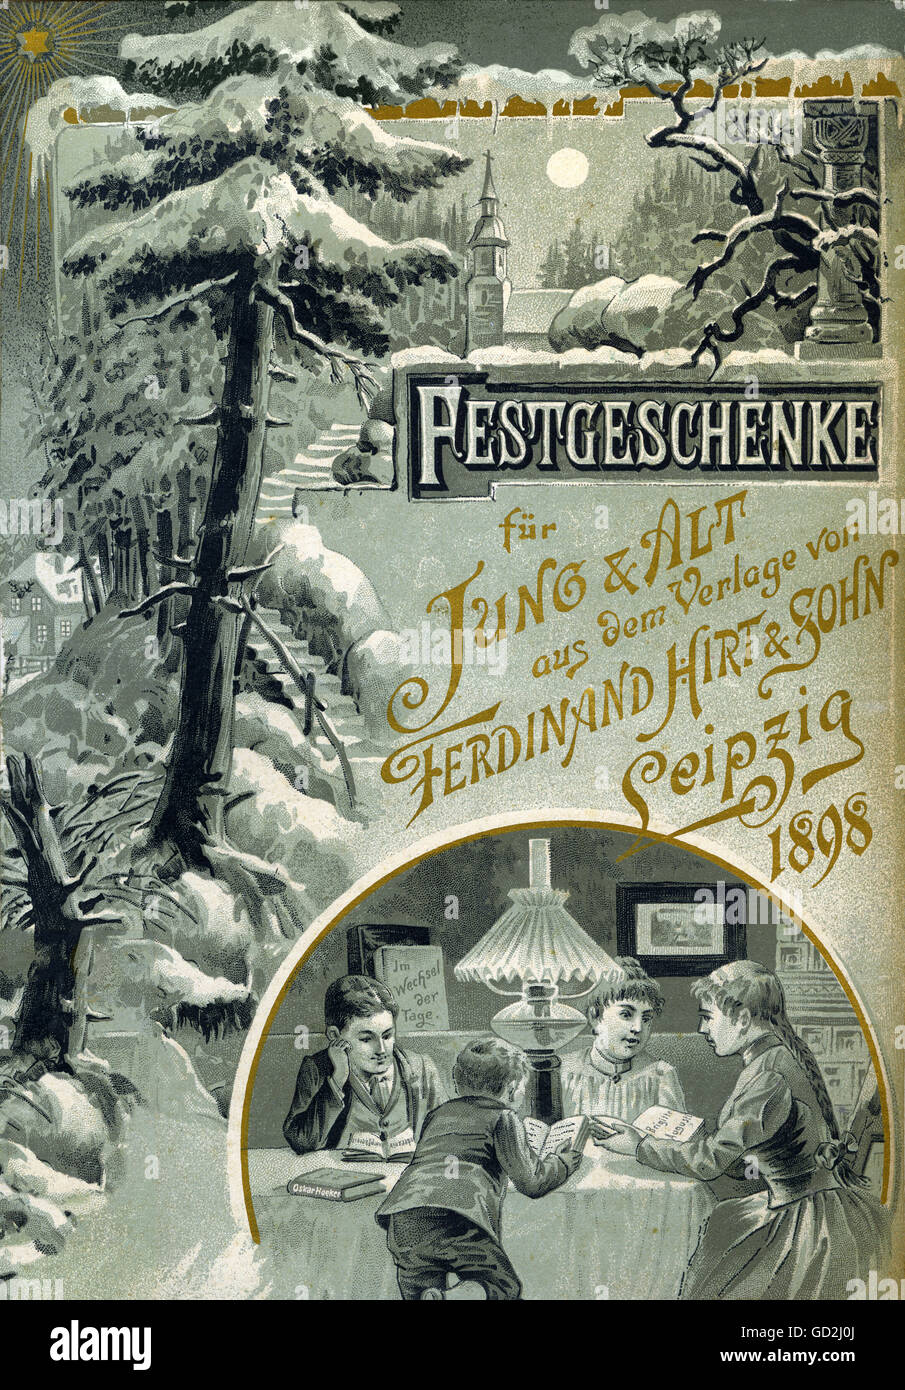 Christmas,celebration gifts for young and old from the publishing house of Ferdinand Hirt & Son Leipzig 1898,Christmas catalogue,firm of publishers,Leipzig,Germany,1898,bookshop,bookstore,bookshops,bookstores,book mail-order,give away,giving away,gives away,gave away,given away,order,ordering,order catalogue,order catalogues,book catalogue,book catalog,catalogue of books,literature,literary,Christmas present,Christmas gift,Christmas presents,Christmas gifts,presenting,Christmas catalogue,present,presents,reading,read,reader,,Additional-Rights-Clearences-Not Available Stock Photo